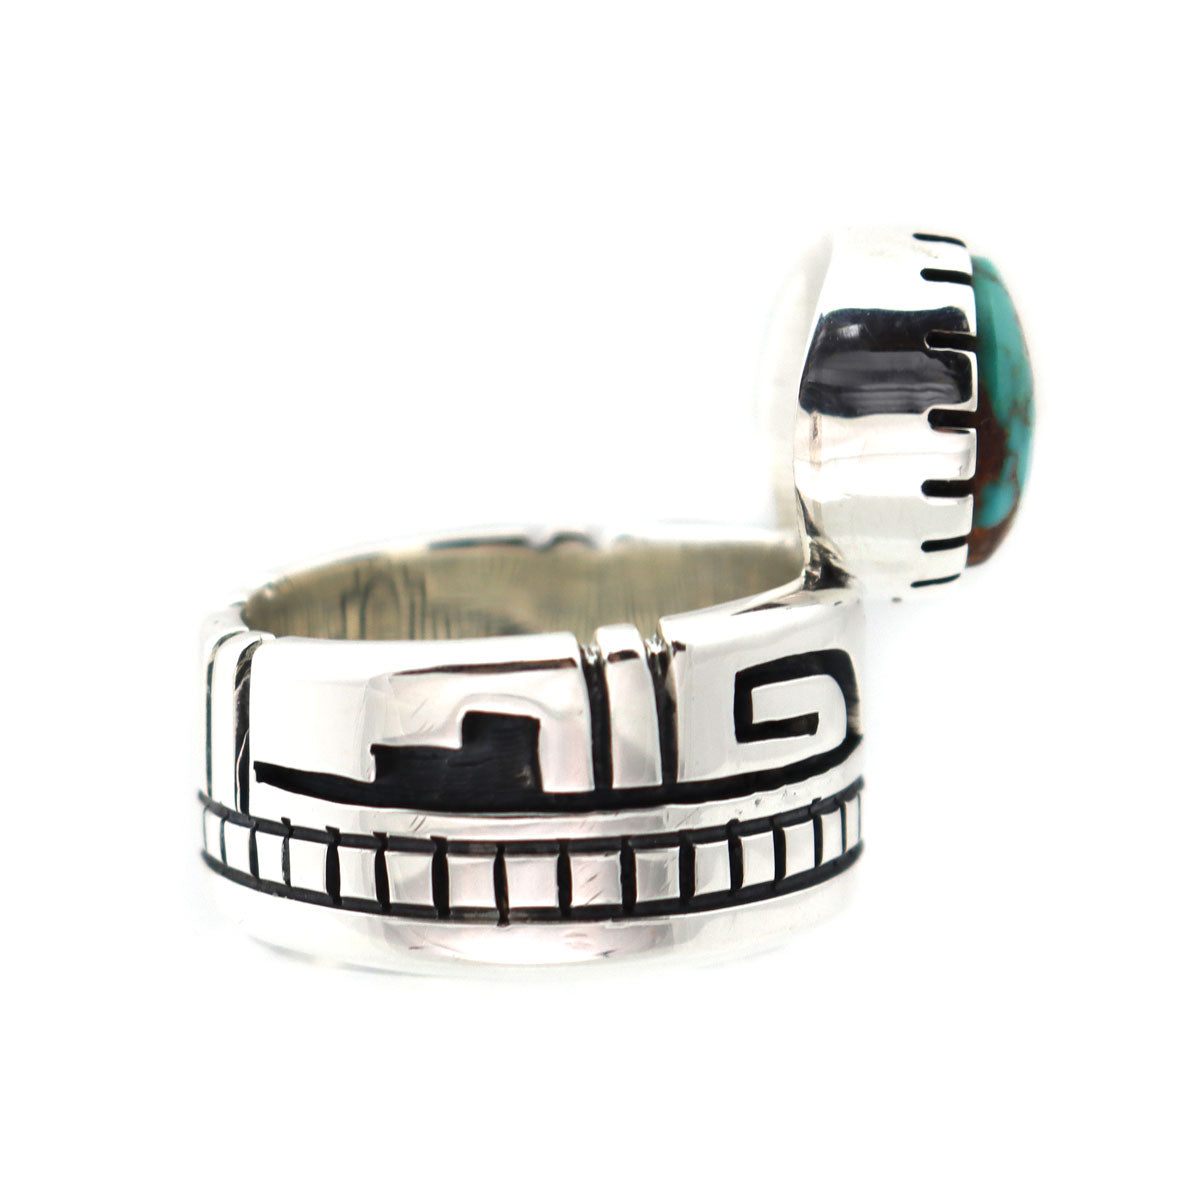 Roy Talahaftewa - Hopi Contemporary Turquoise and Silver Overlay Ring, size 9 (J14265)4